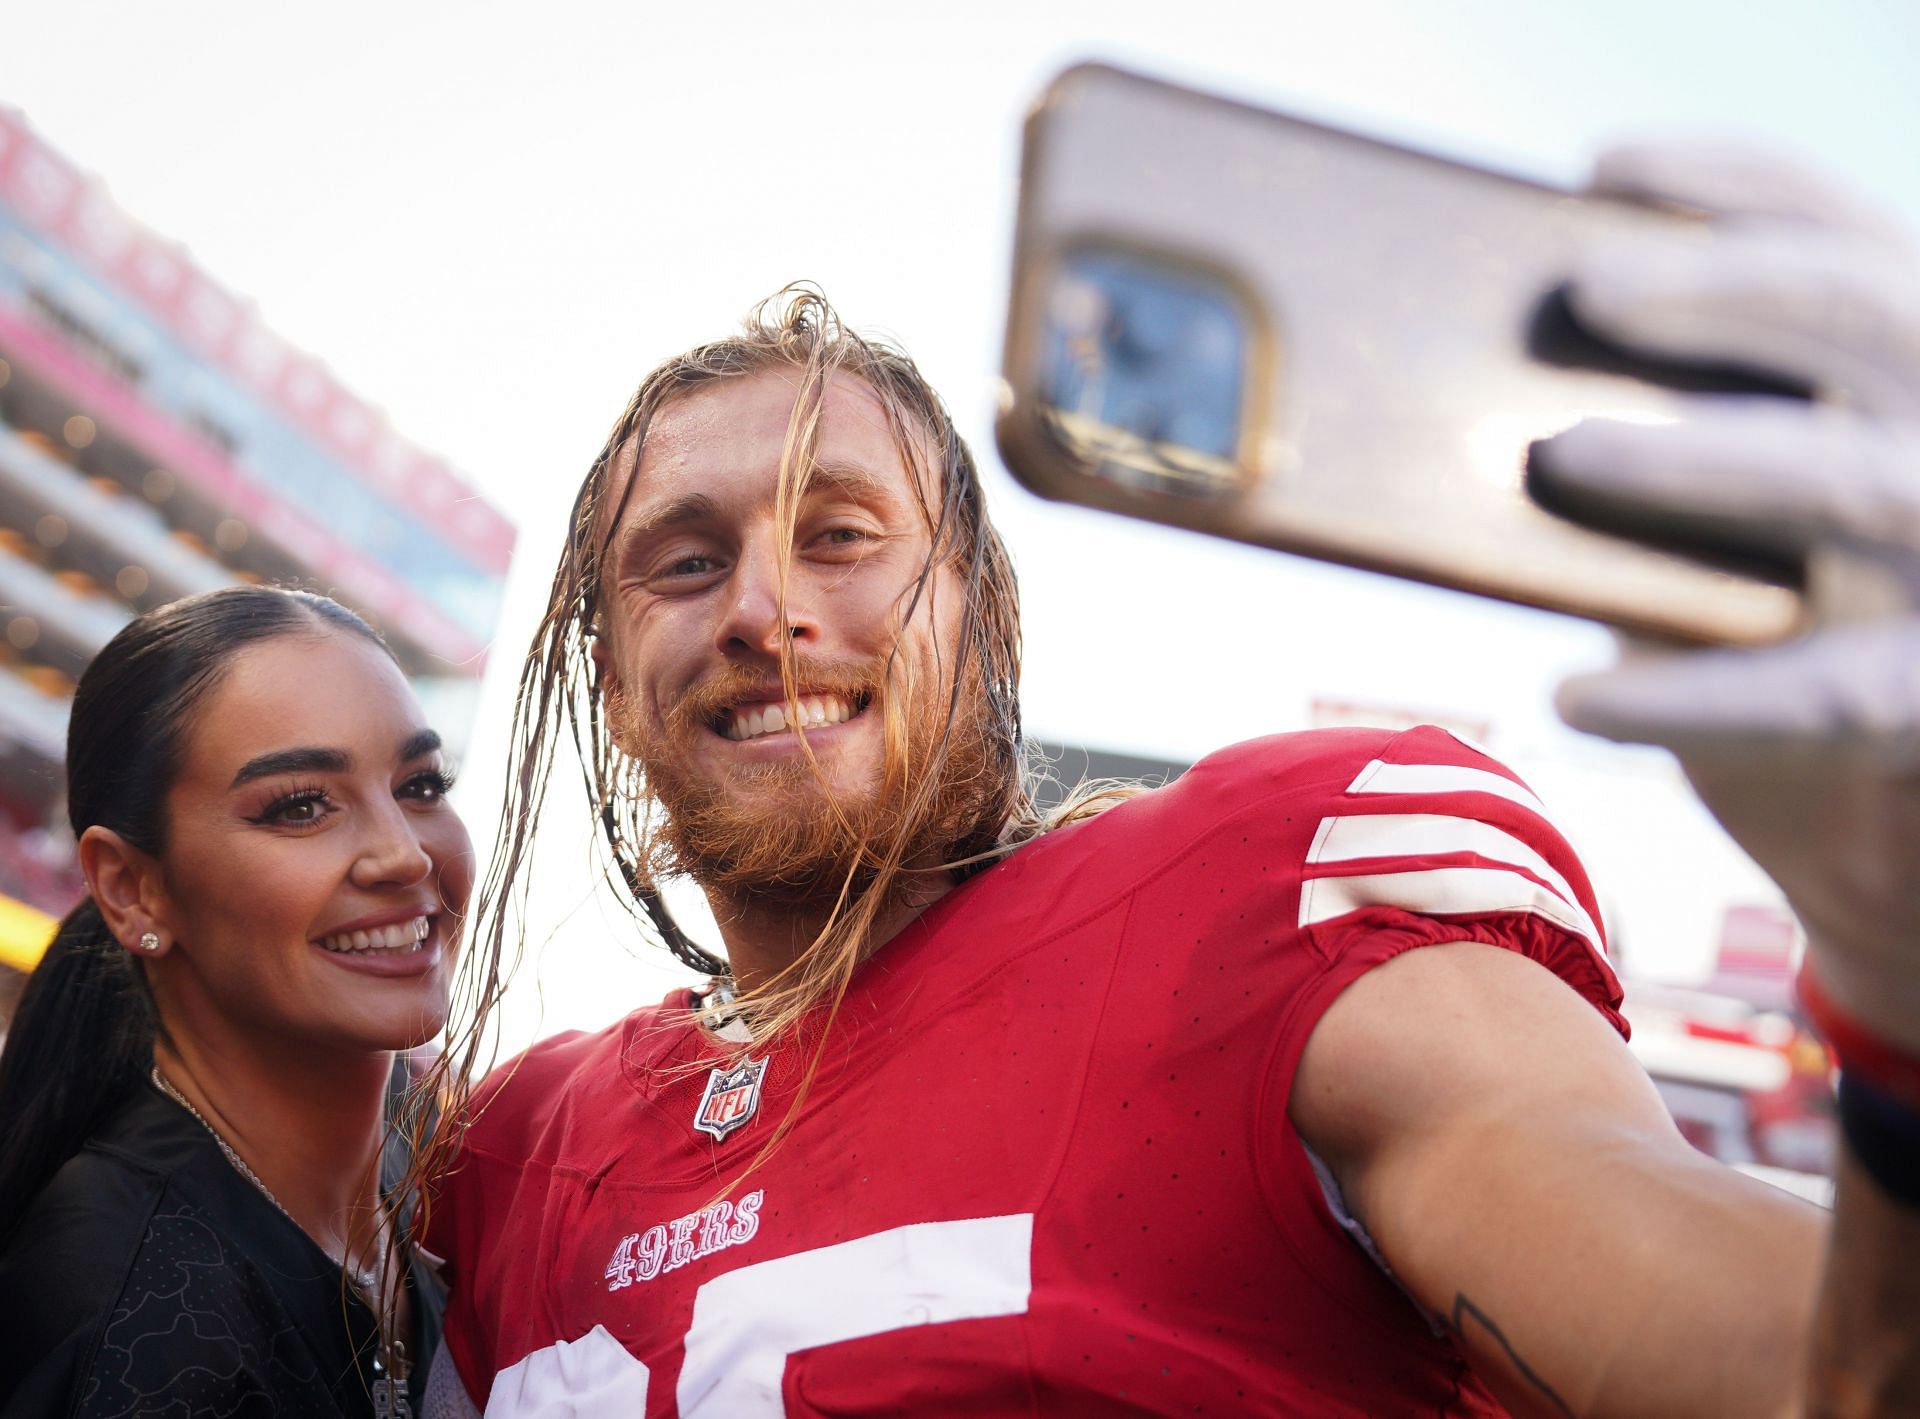 49ers star George Kittle pens heartfelt note on wife Claire Kittle's 30th birthday: "Queen"